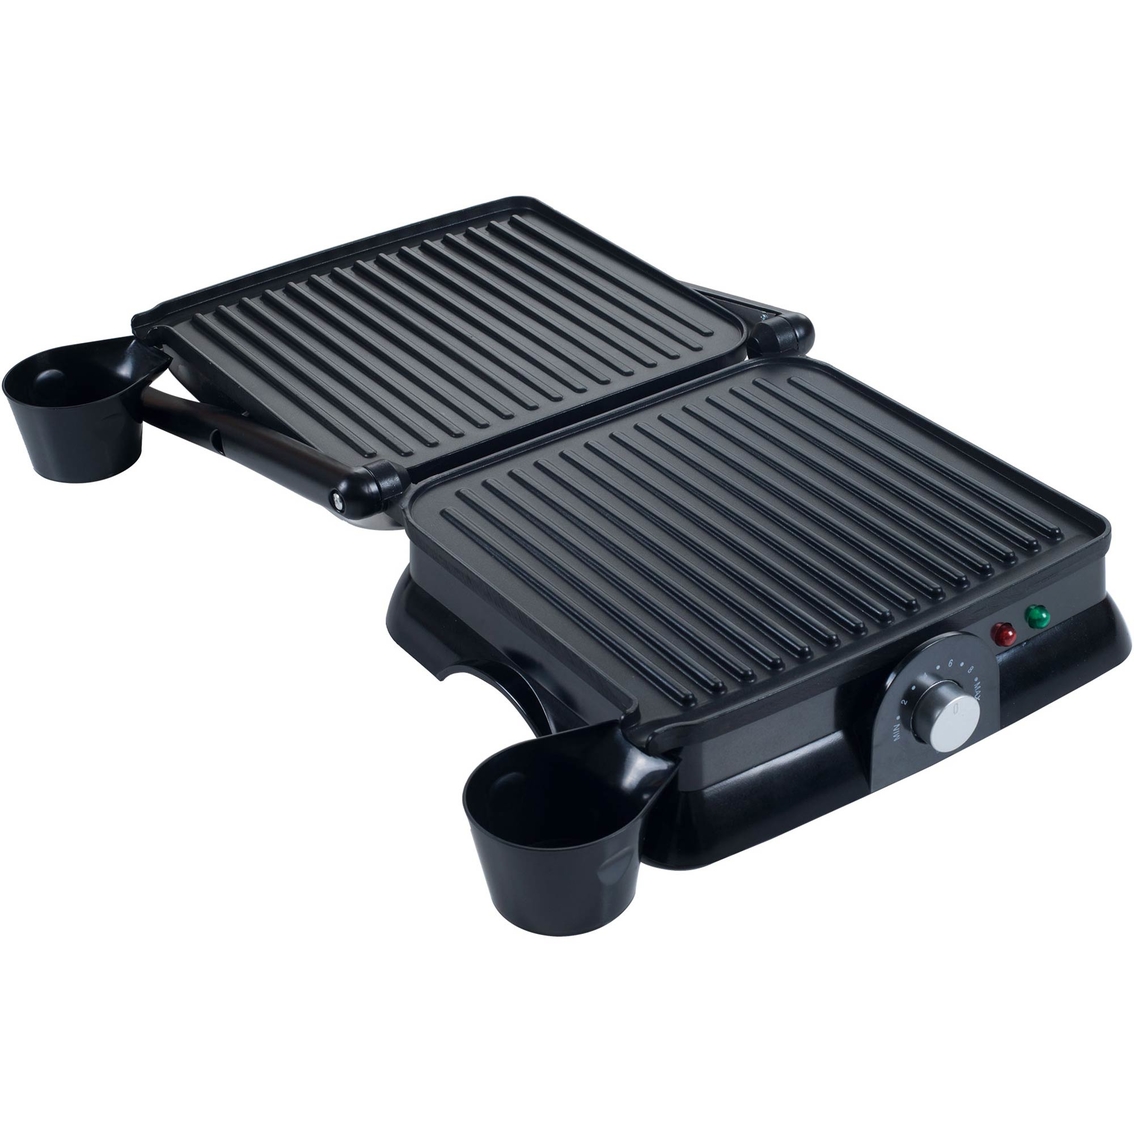 Chef Buddy Electric Panini Press Indoor Grill and Gourmet Sandwich Maker - Image 2 of 3